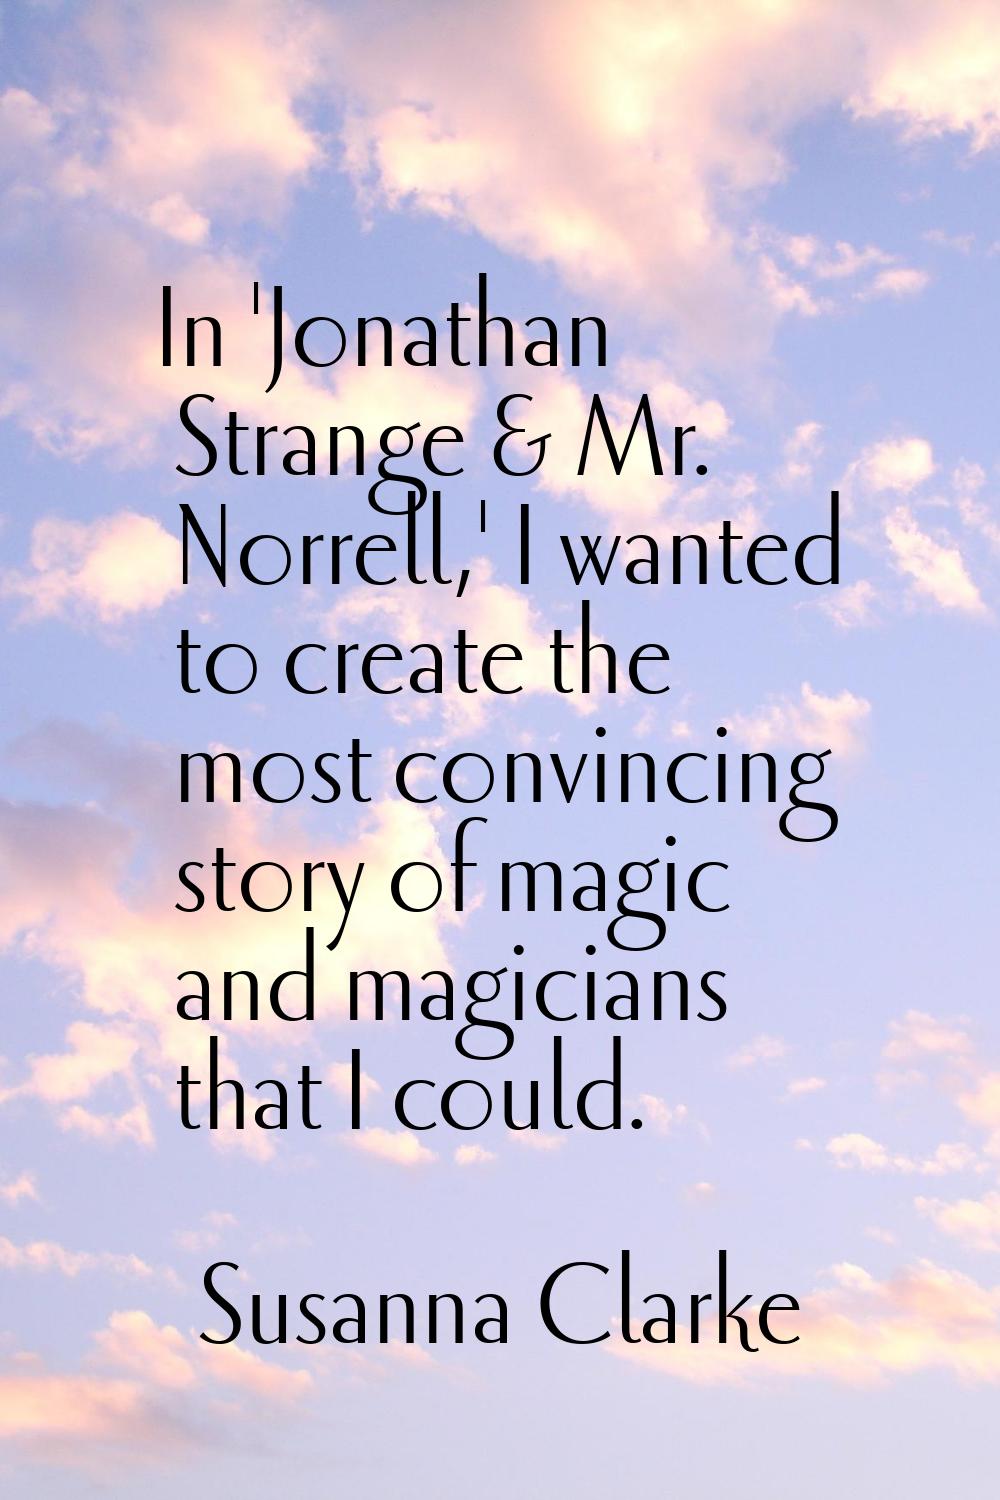 In 'Jonathan Strange & Mr. Norrell,' I wanted to create the most convincing story of magic and magi